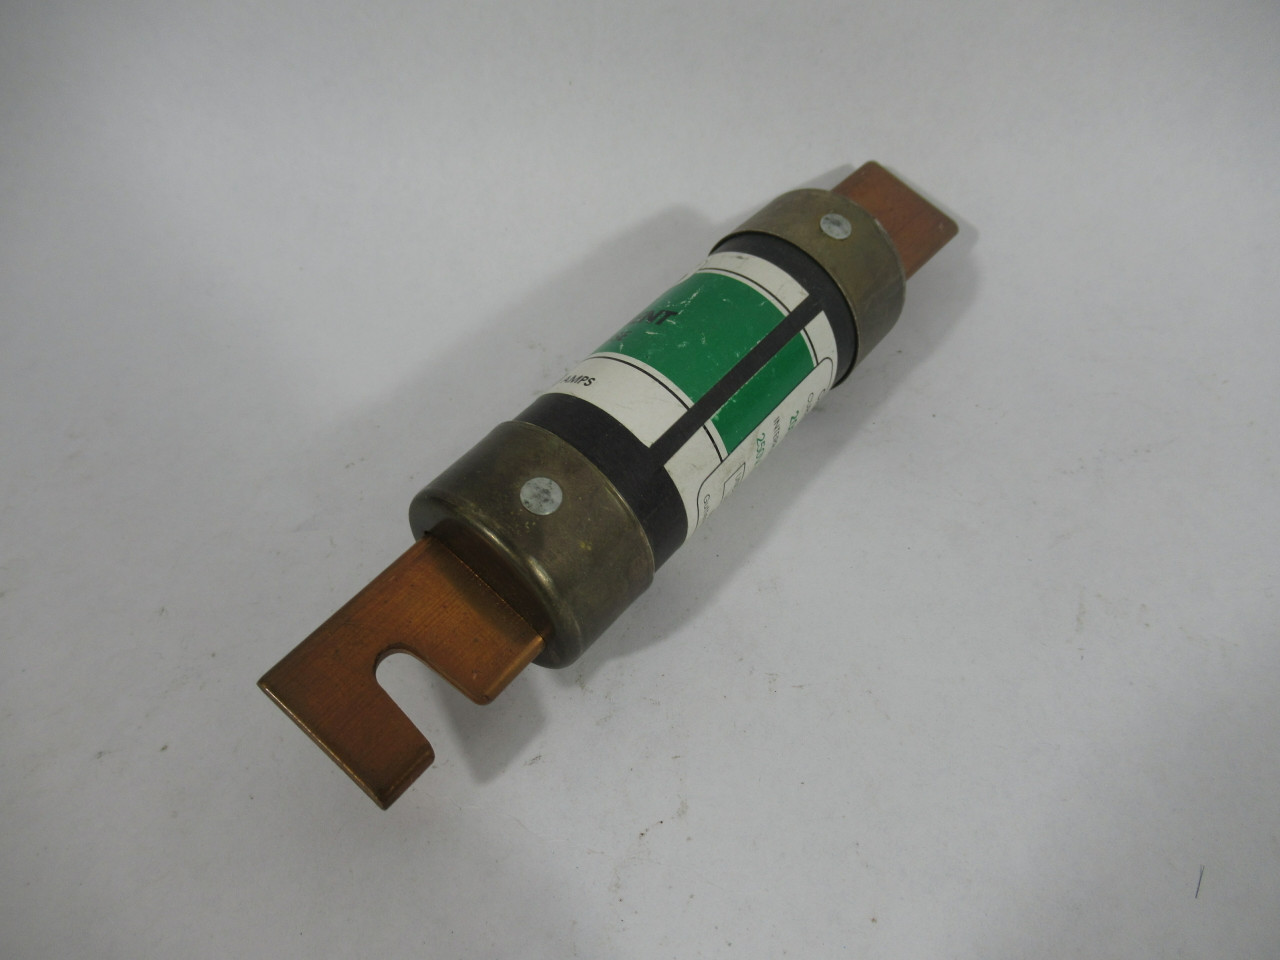 Cefco CRN-R-200 Dual Element Time Delay Fuse 200A 250VAC USED